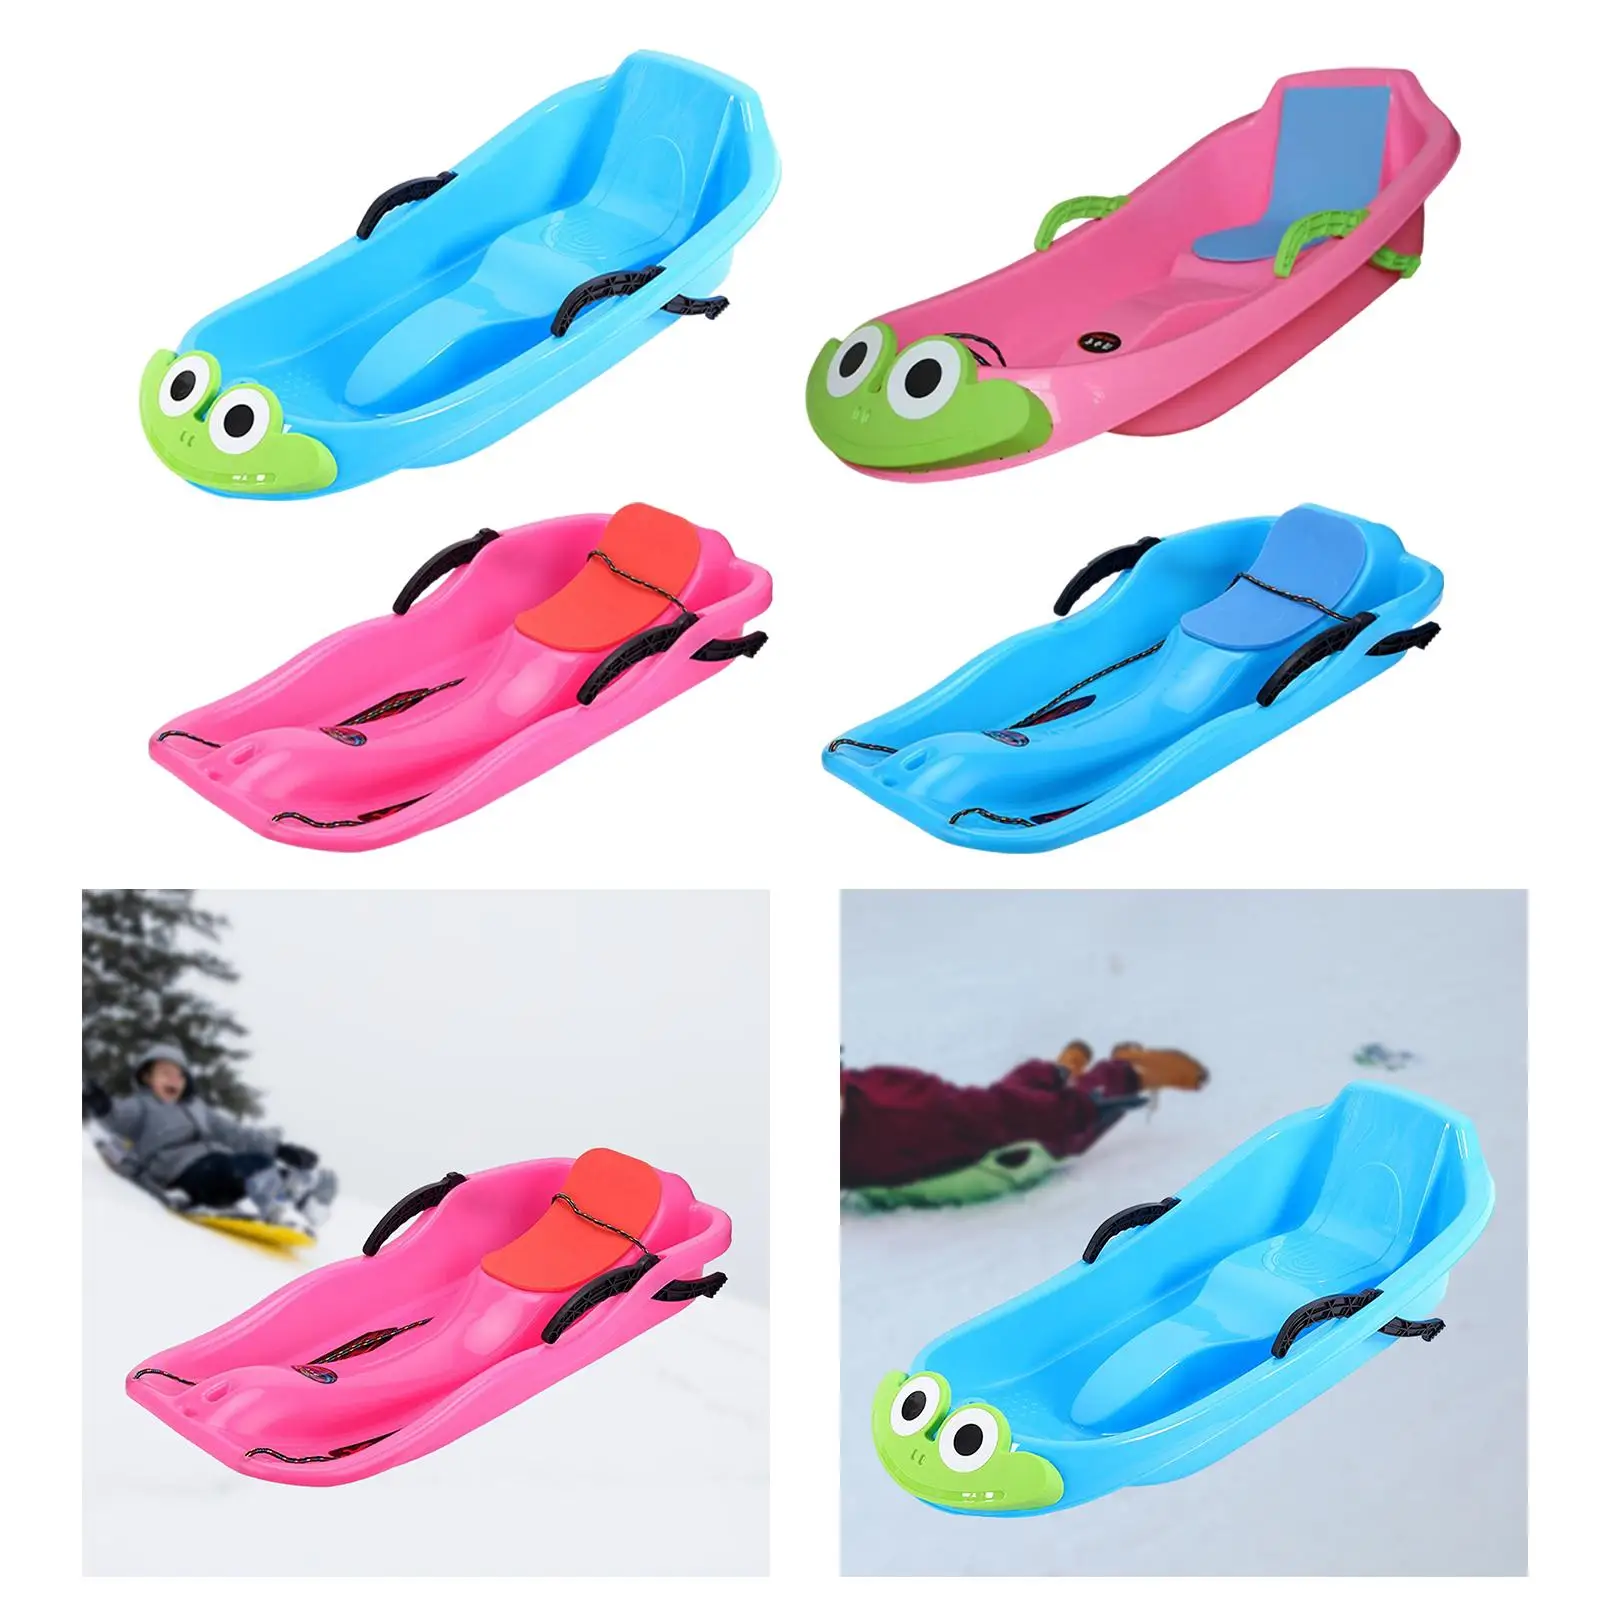 Heavy Duty Snow Sled Grass Sand Slider Wear Resistant Skiing Board Snowboard Outdoor Sports Toboggan Sleigh for Skiing Skating